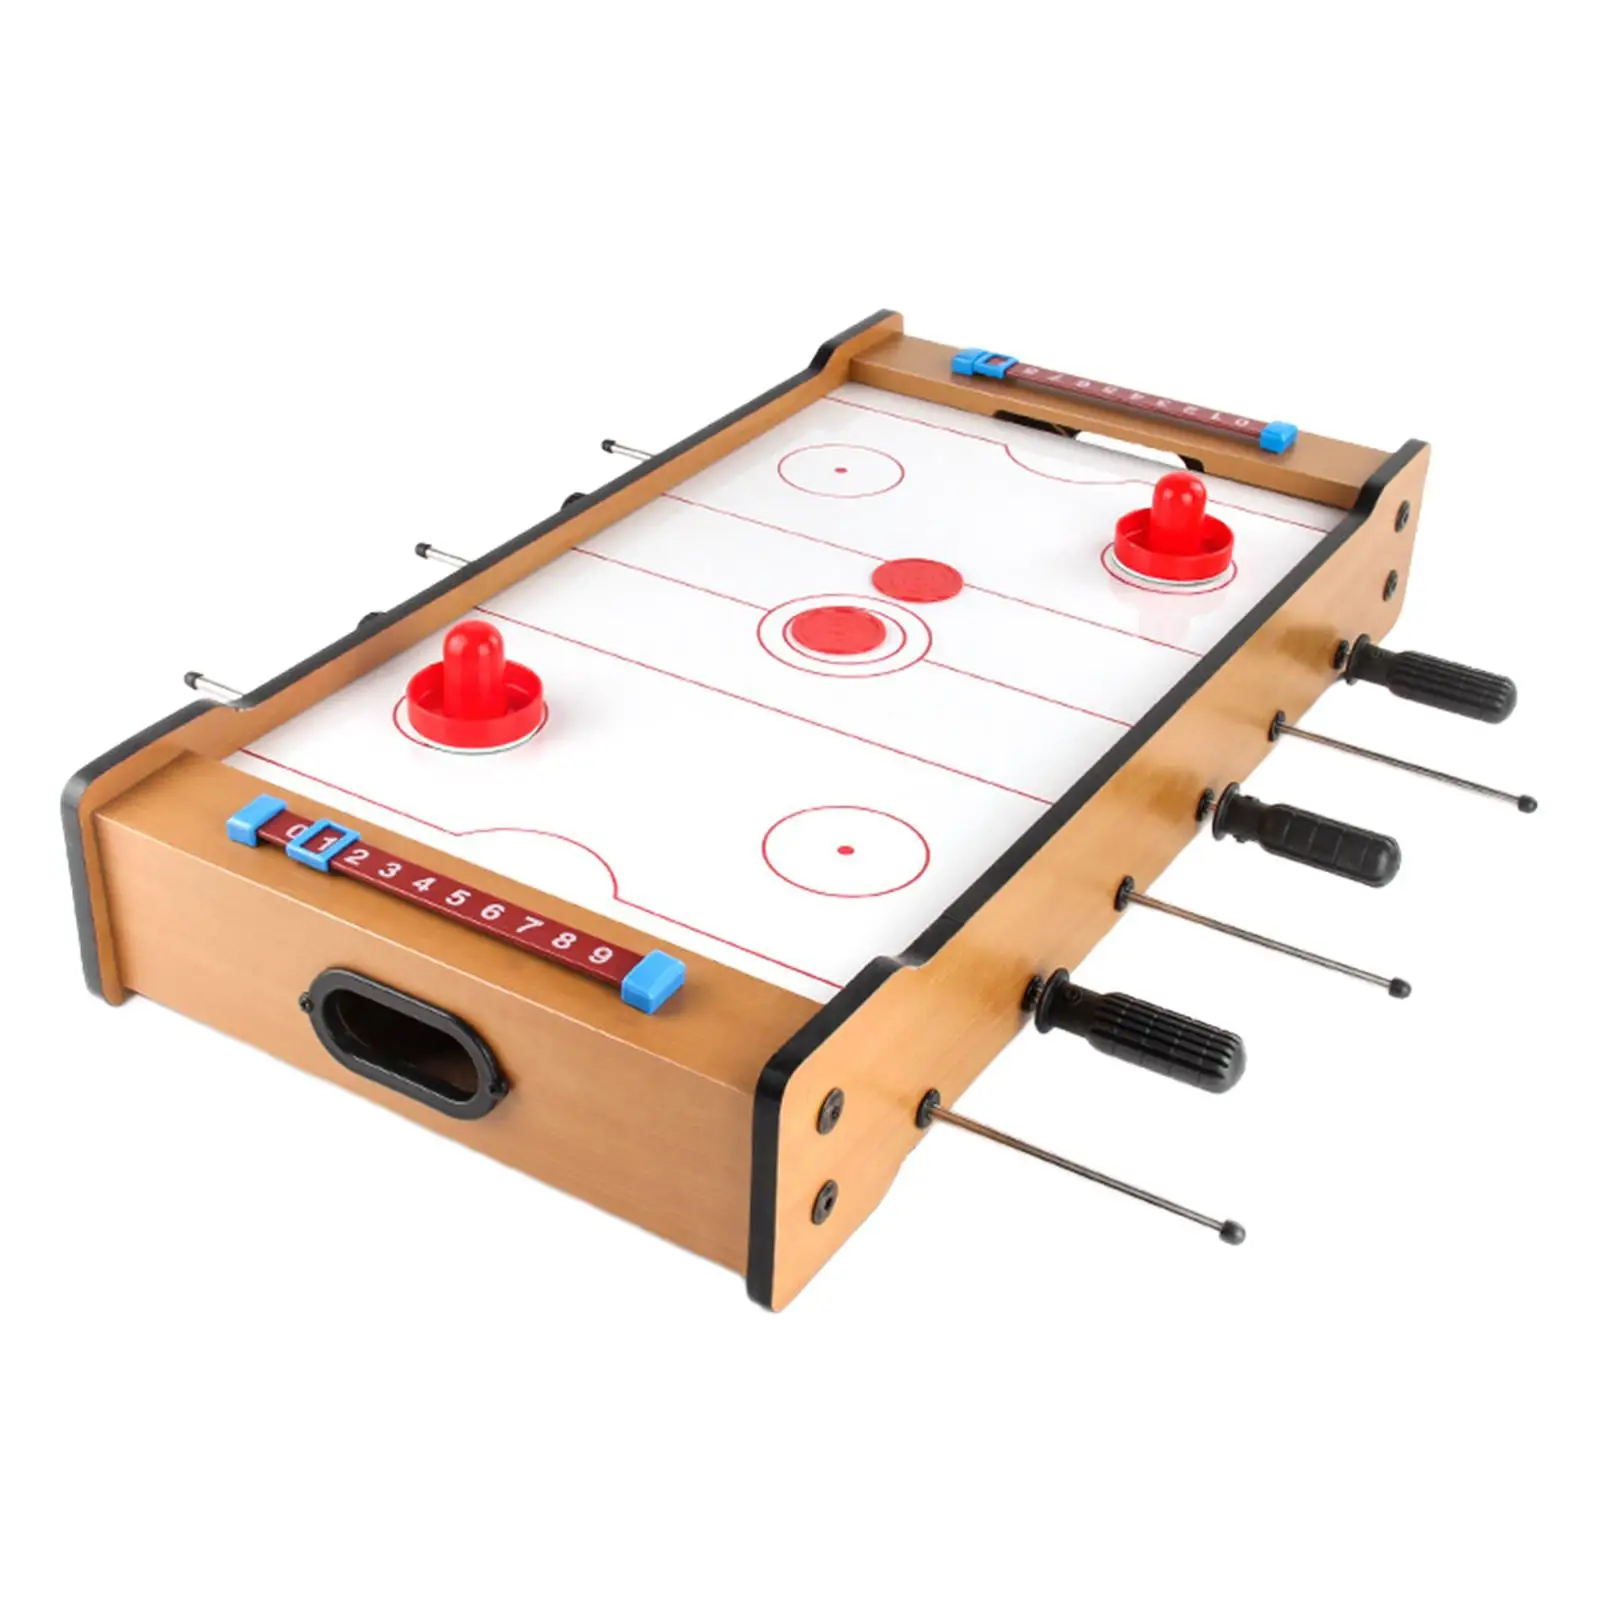 Portable Soccer Hockey Game Set Interactive Family for Kids Two players Adults